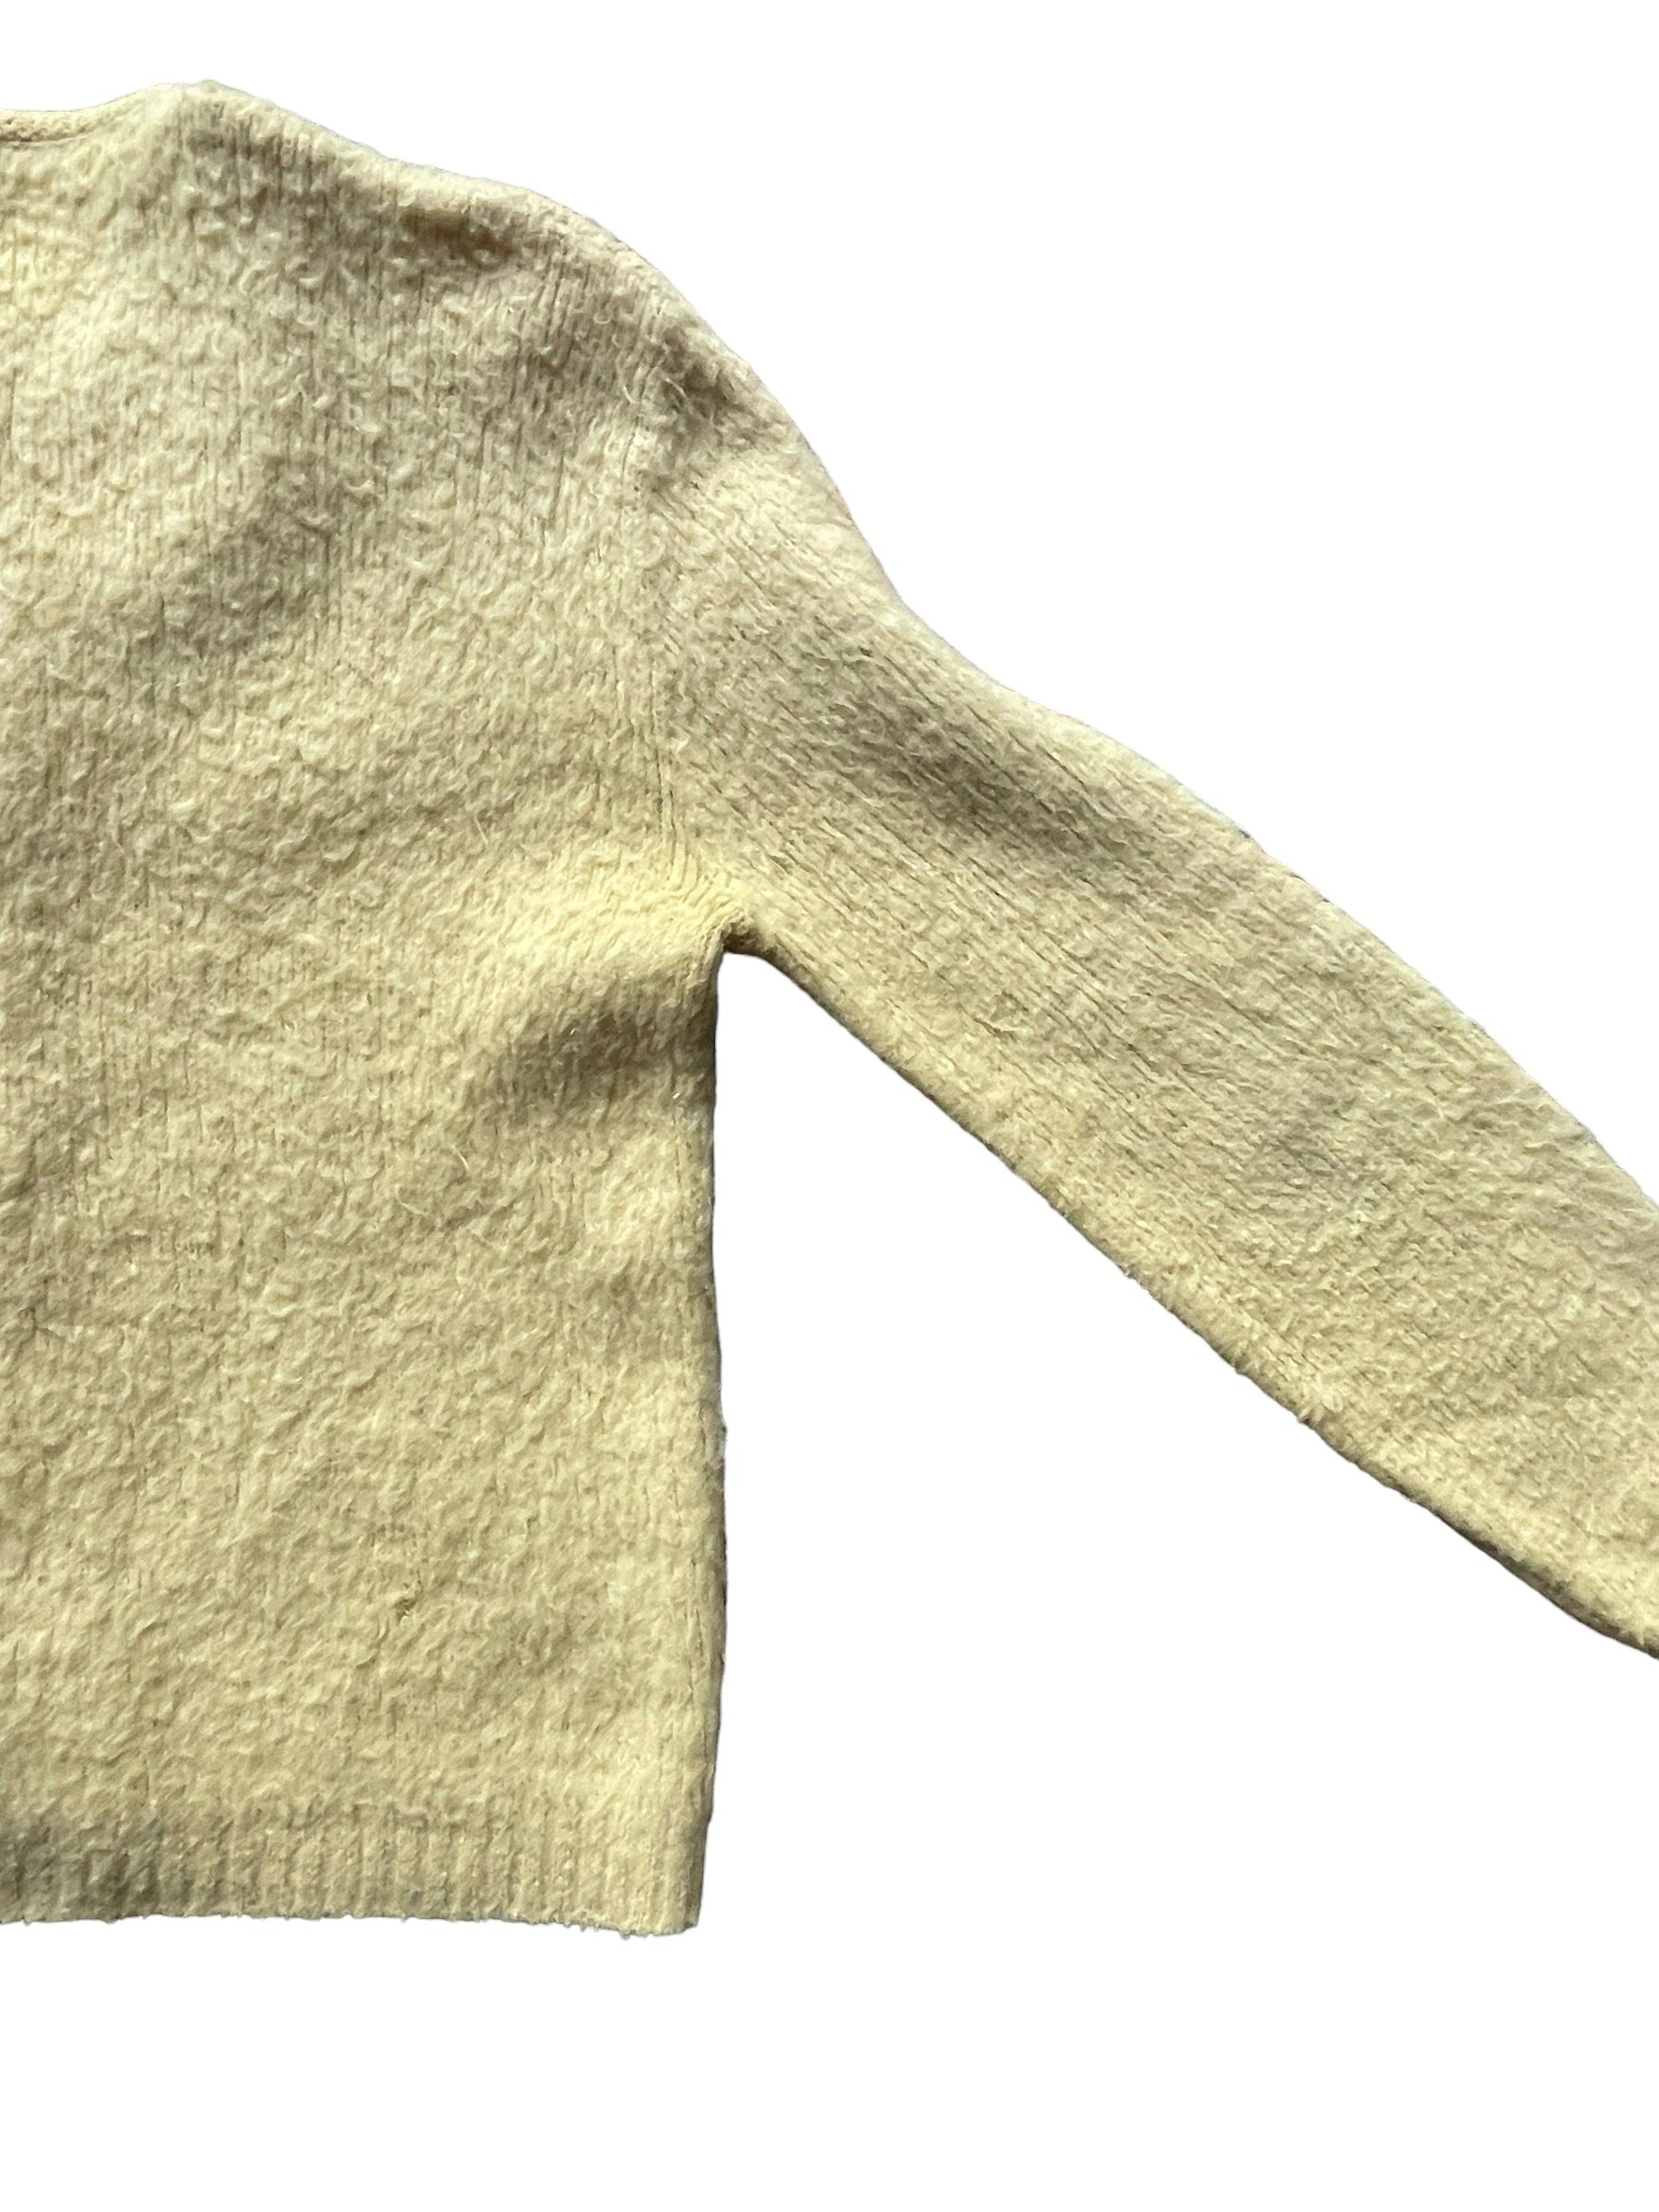 Back right side view of Vintage 1950s Yellow Orlon Mohair Cardigan | Barn Owl Sweaters | Seattle Vintage